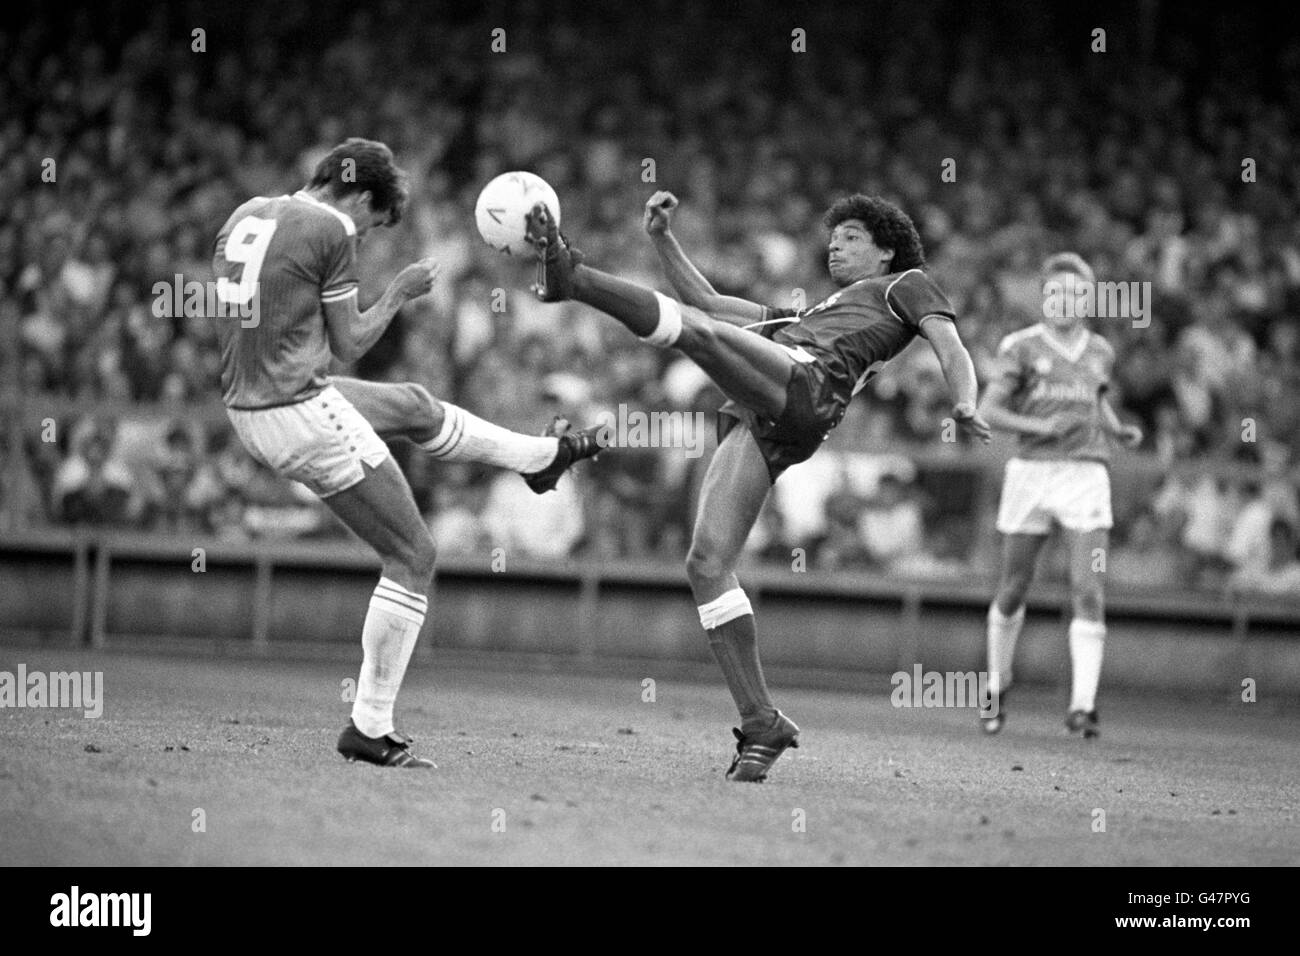 Soccer - Today League Division One - Leicester City v Nottingham Forest - Filbert Street. Leicester City's Alan Smith (l) and Nottingham Forest's Des Walker (r) both go for the ball. Stock Photo